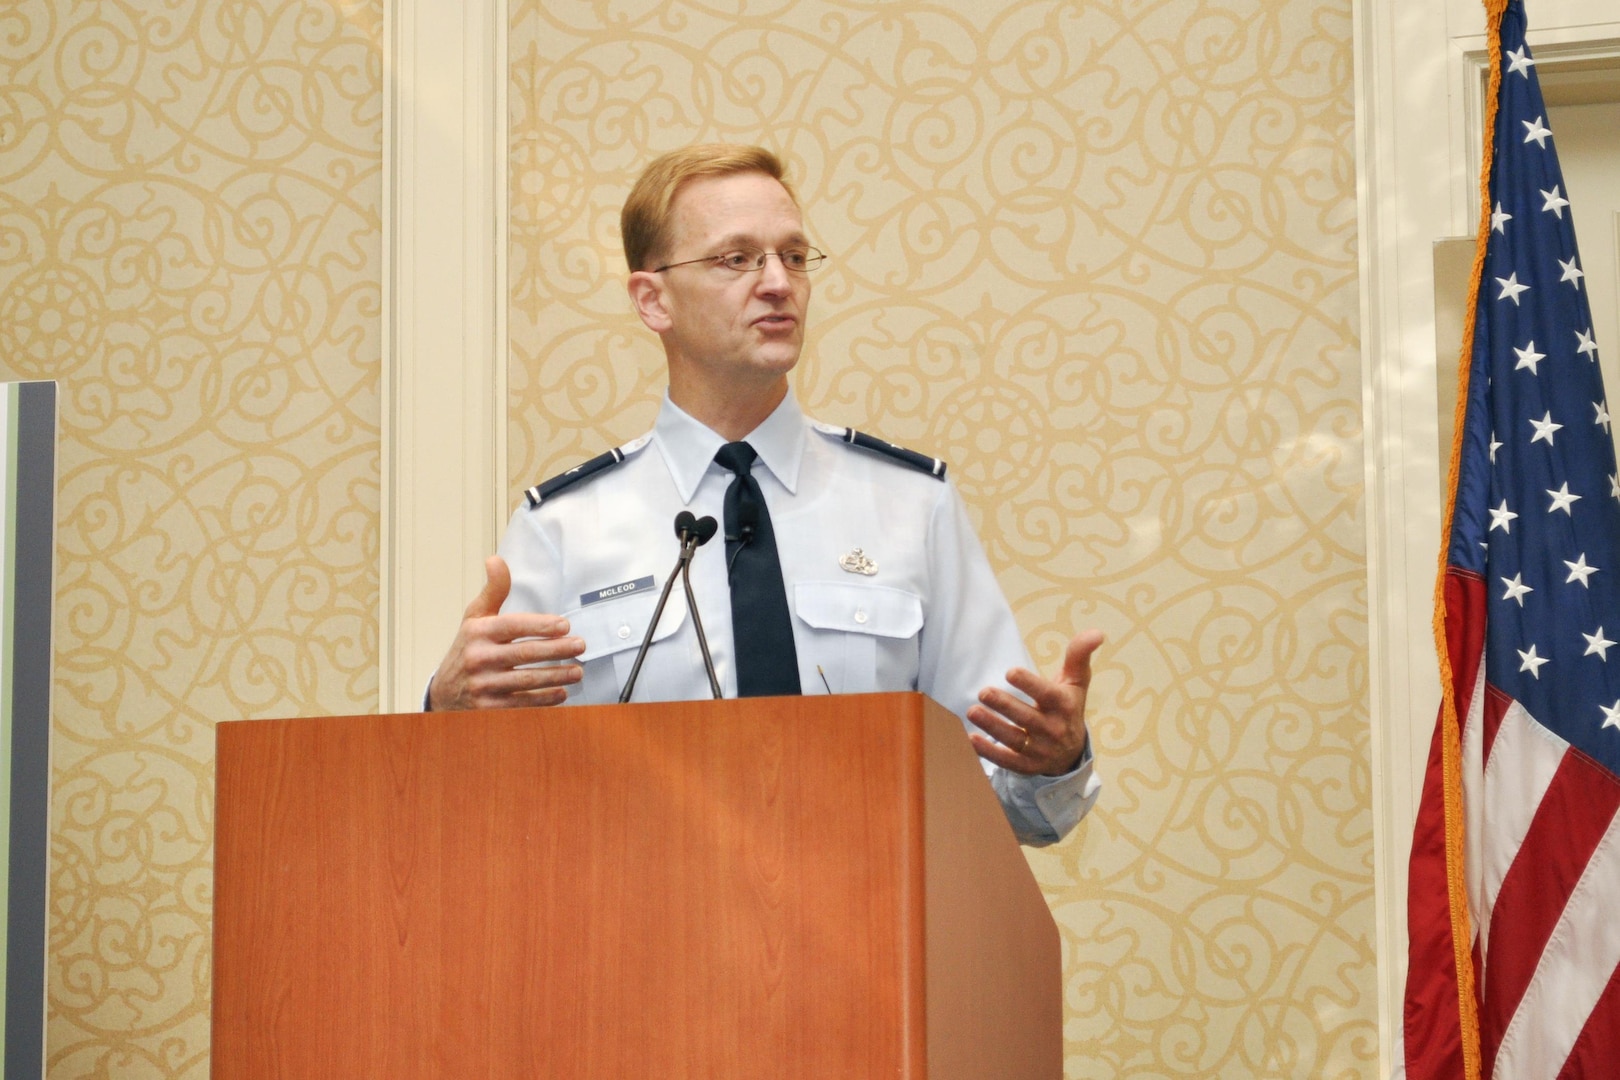 Defense Logistics Agency Energy Commander Air Force Brig. Gen. Mark McLeod addresses the audience during his presentation at the 15th annual Defense Logistics conference in Alexandria, Virginia, Dec. 2.